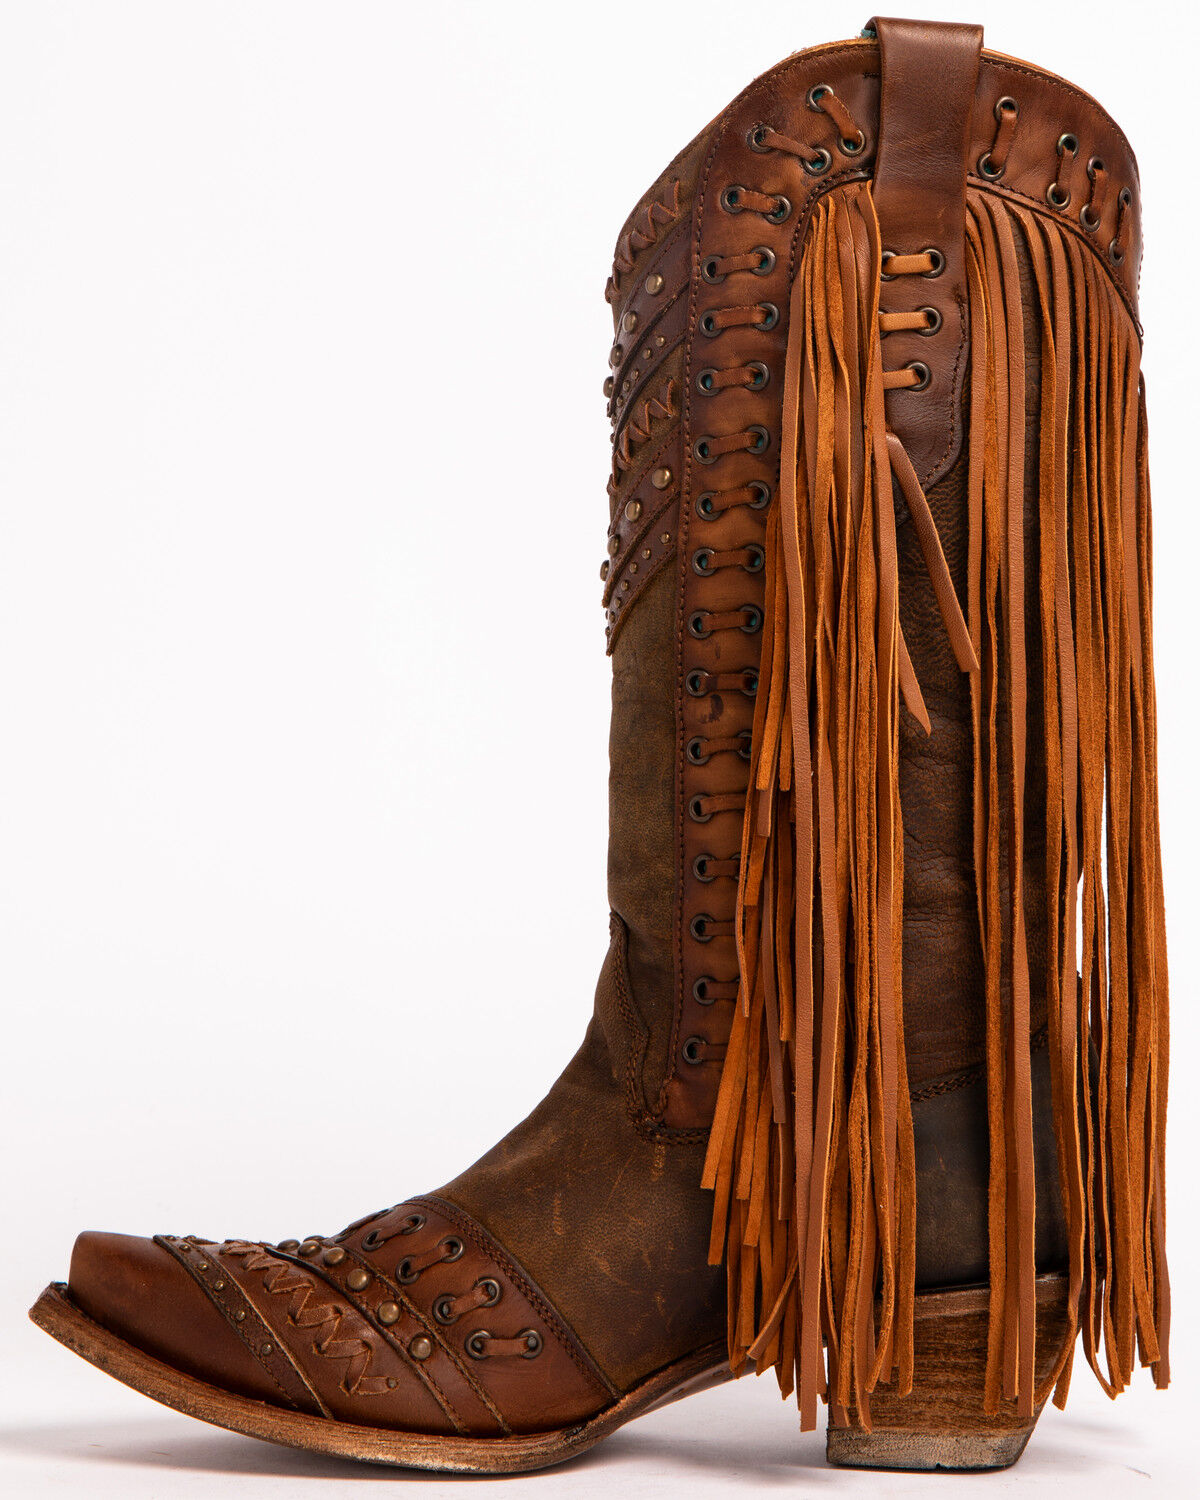 corral booties with fringe